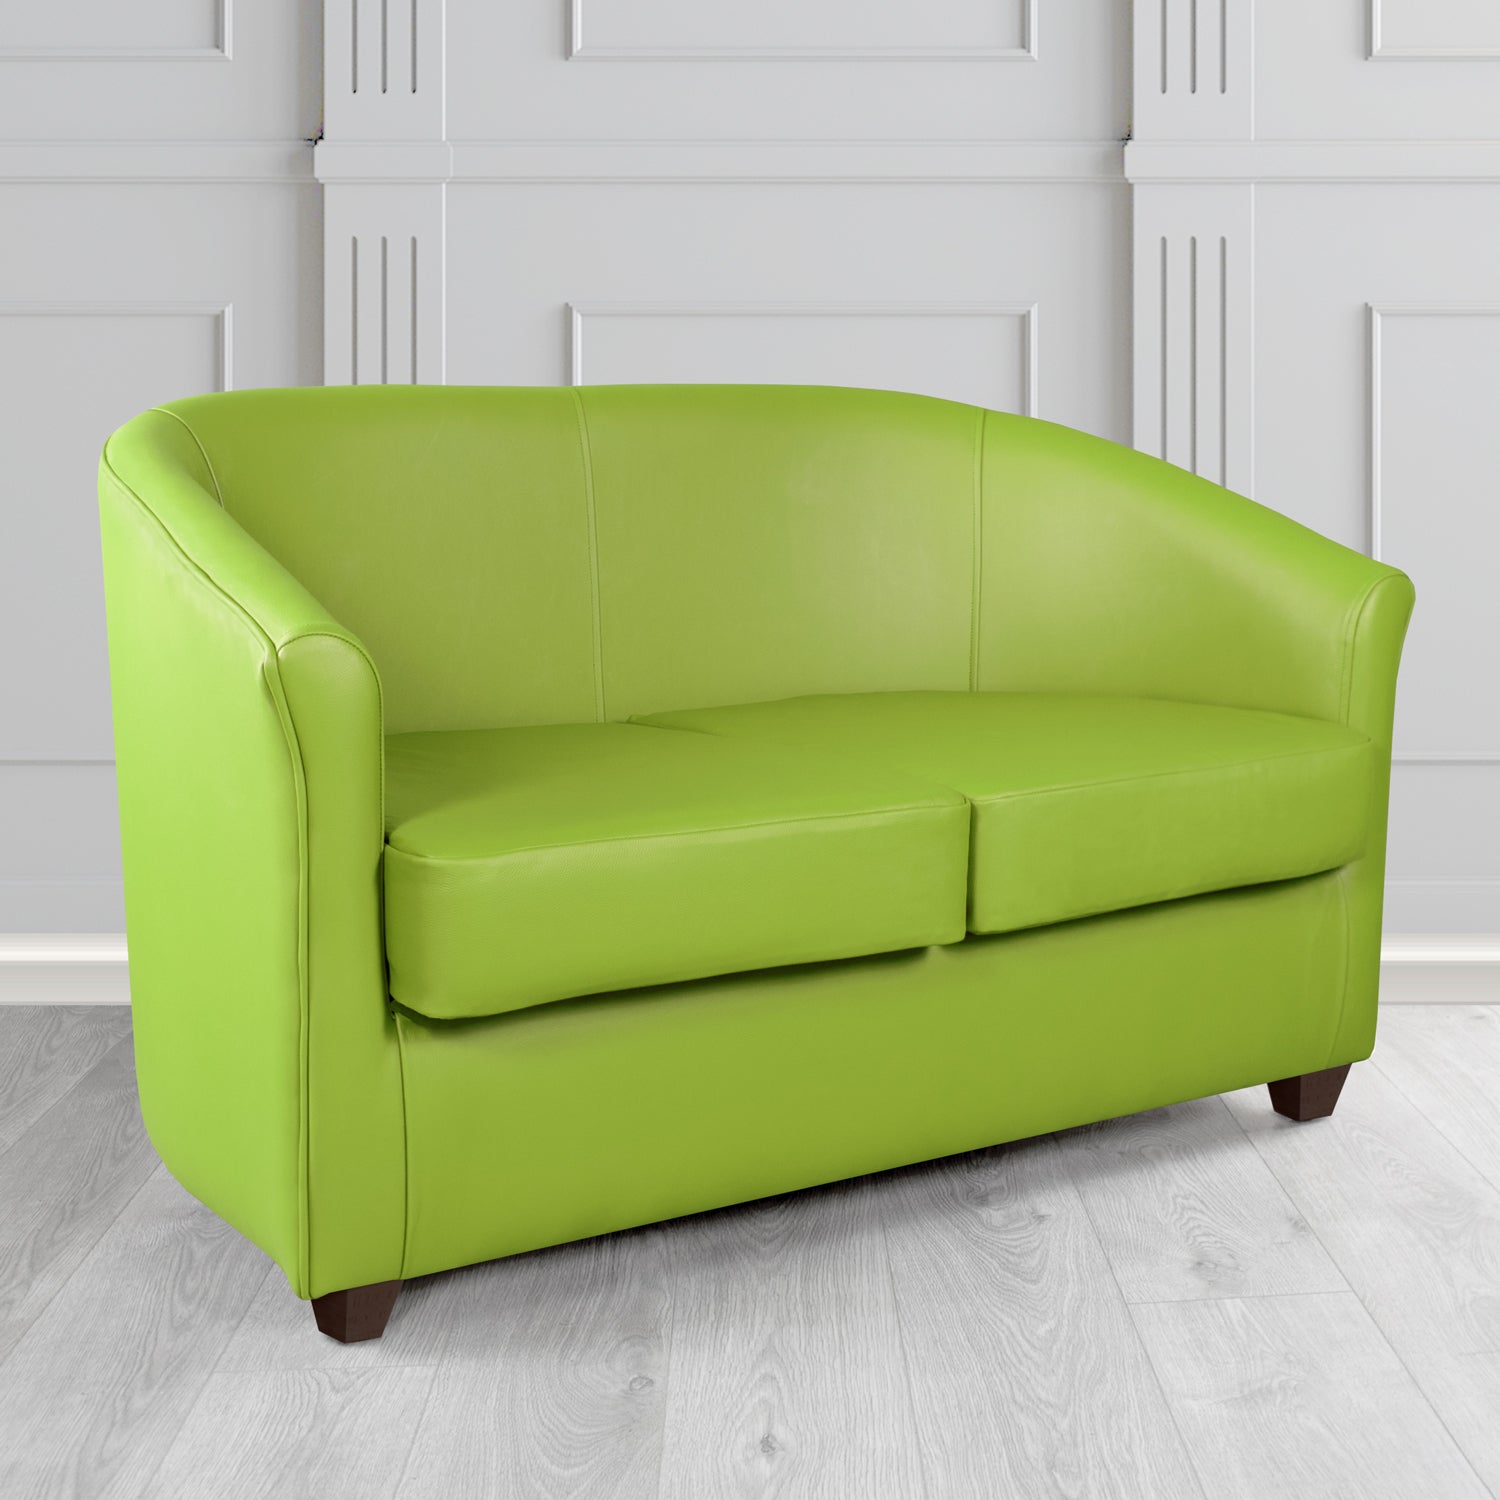 Cannes 2 Seater Tub Sofa in Just Colour Citrus Green Crib 5 Faux Leather - The Tub Chair Shop